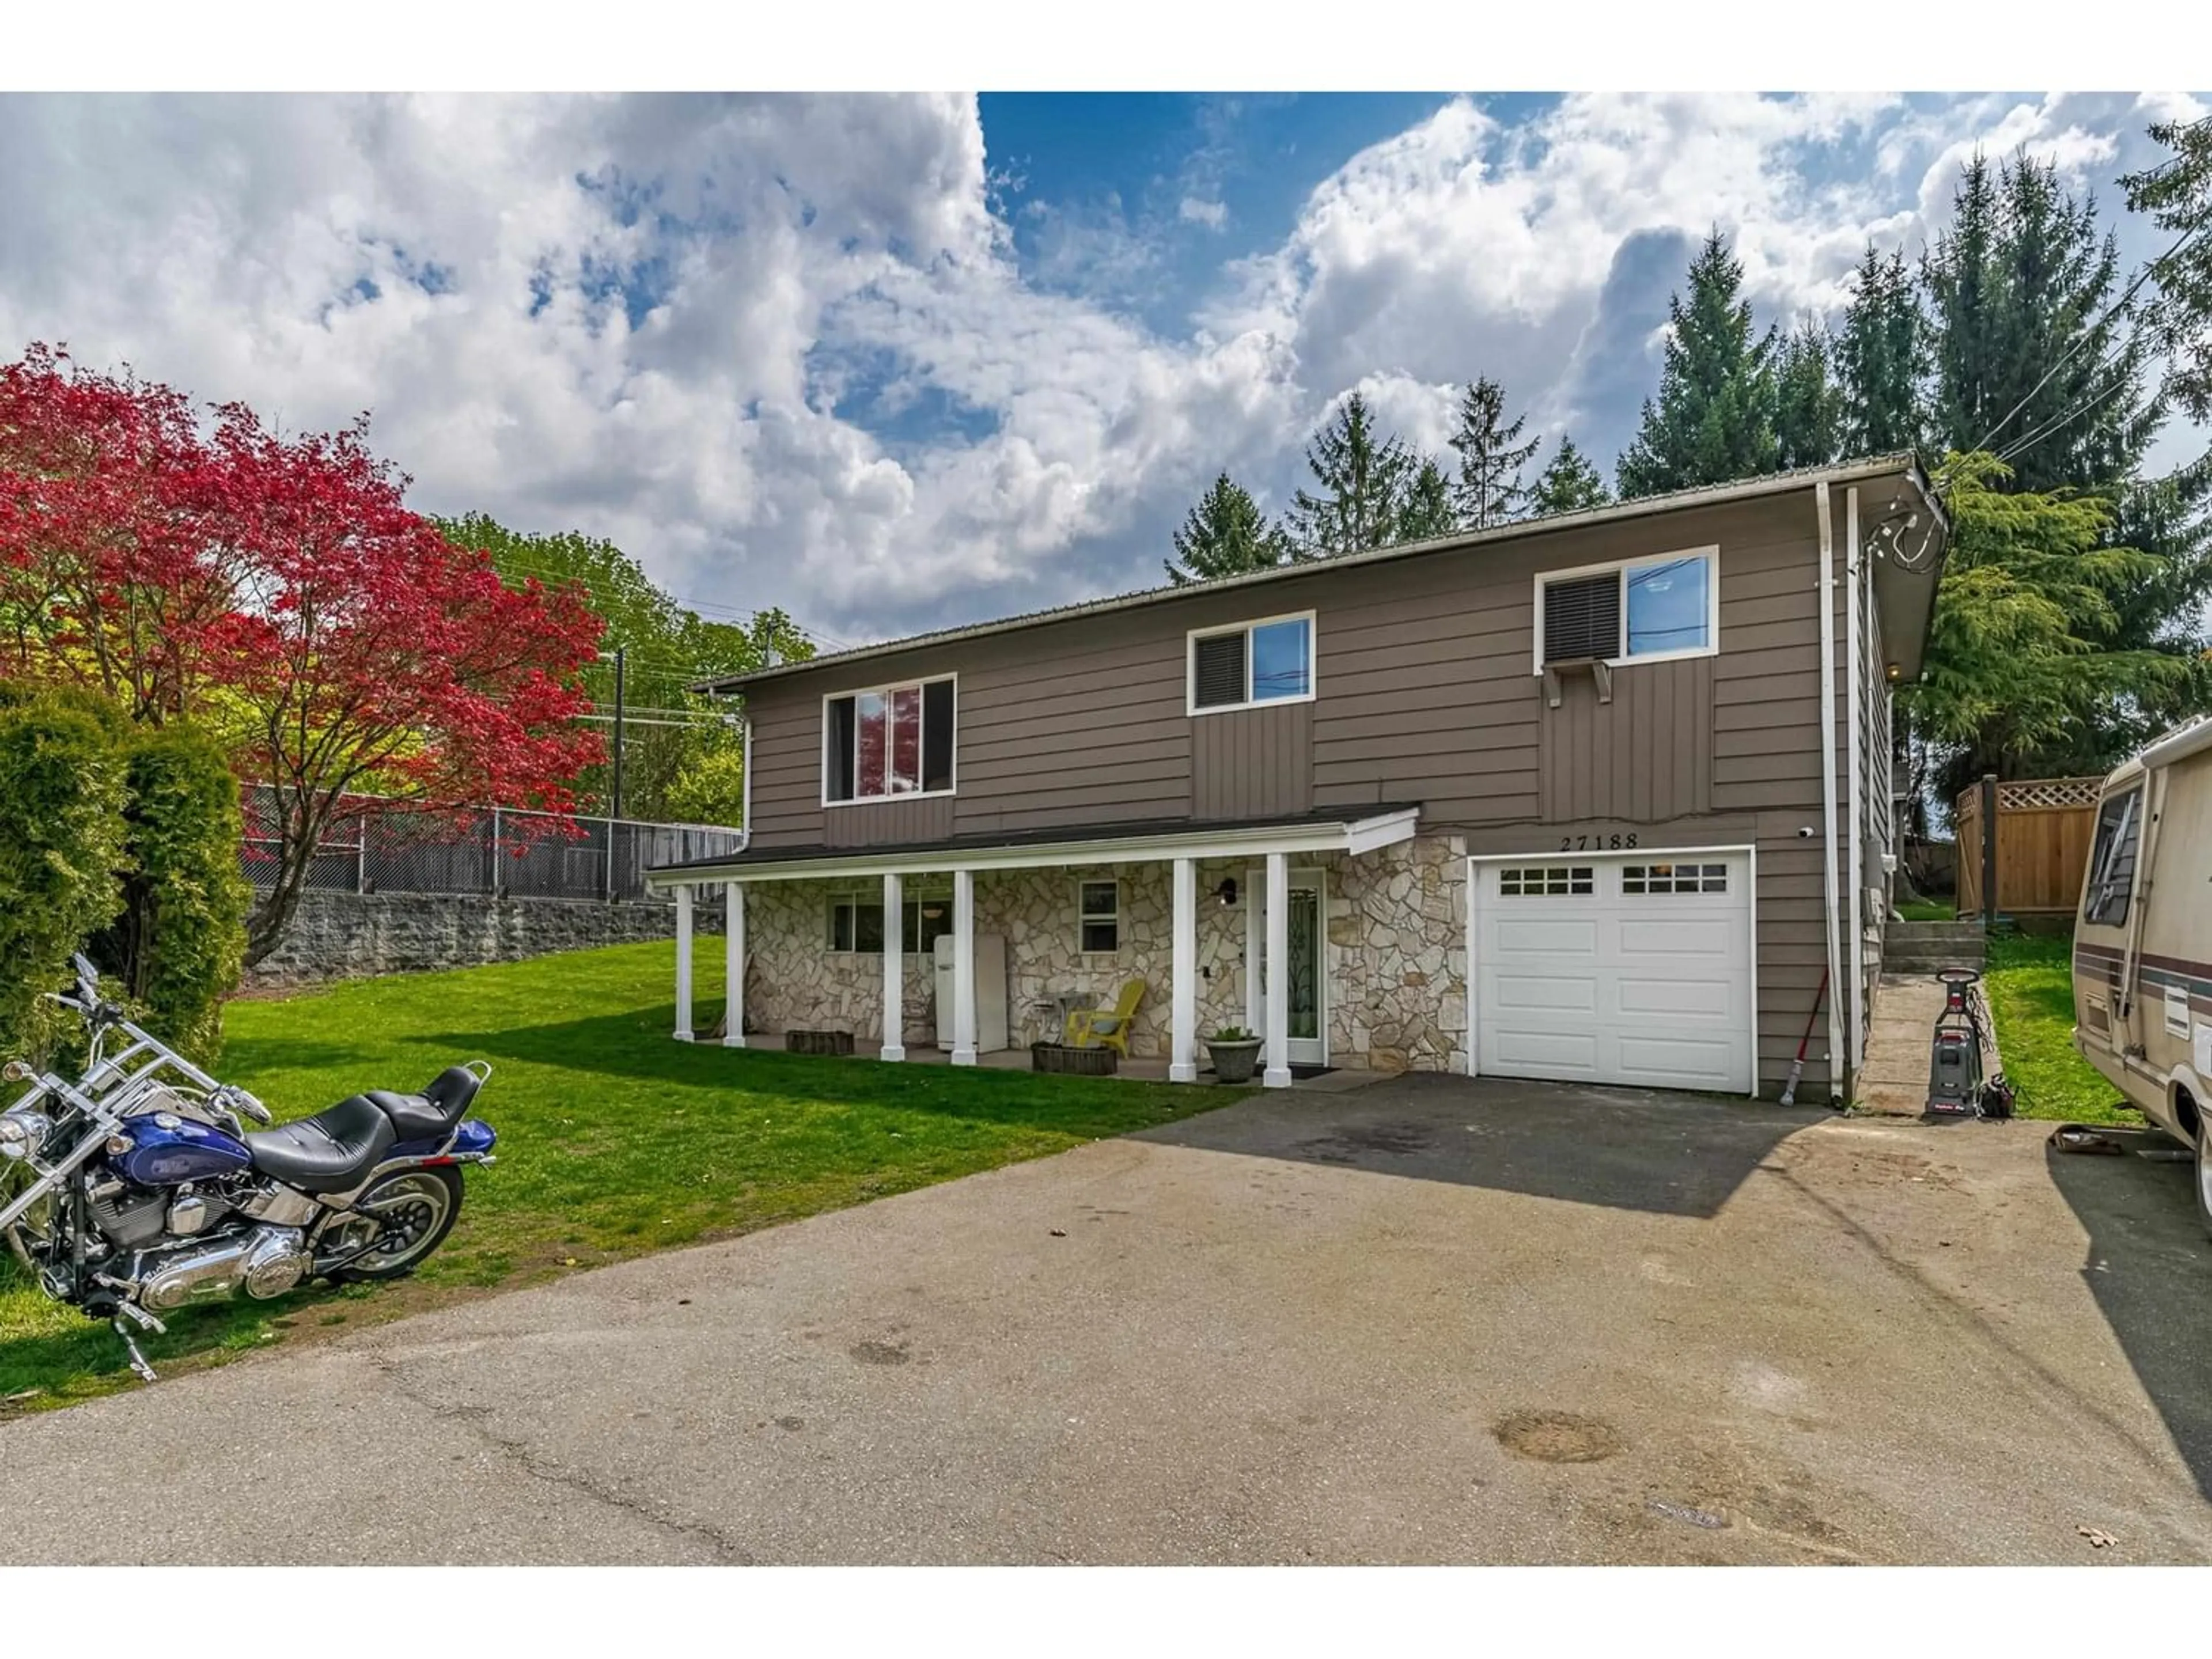 Frontside or backside of a home for 27188 28B AVENUE, Langley British Columbia V4W3A5